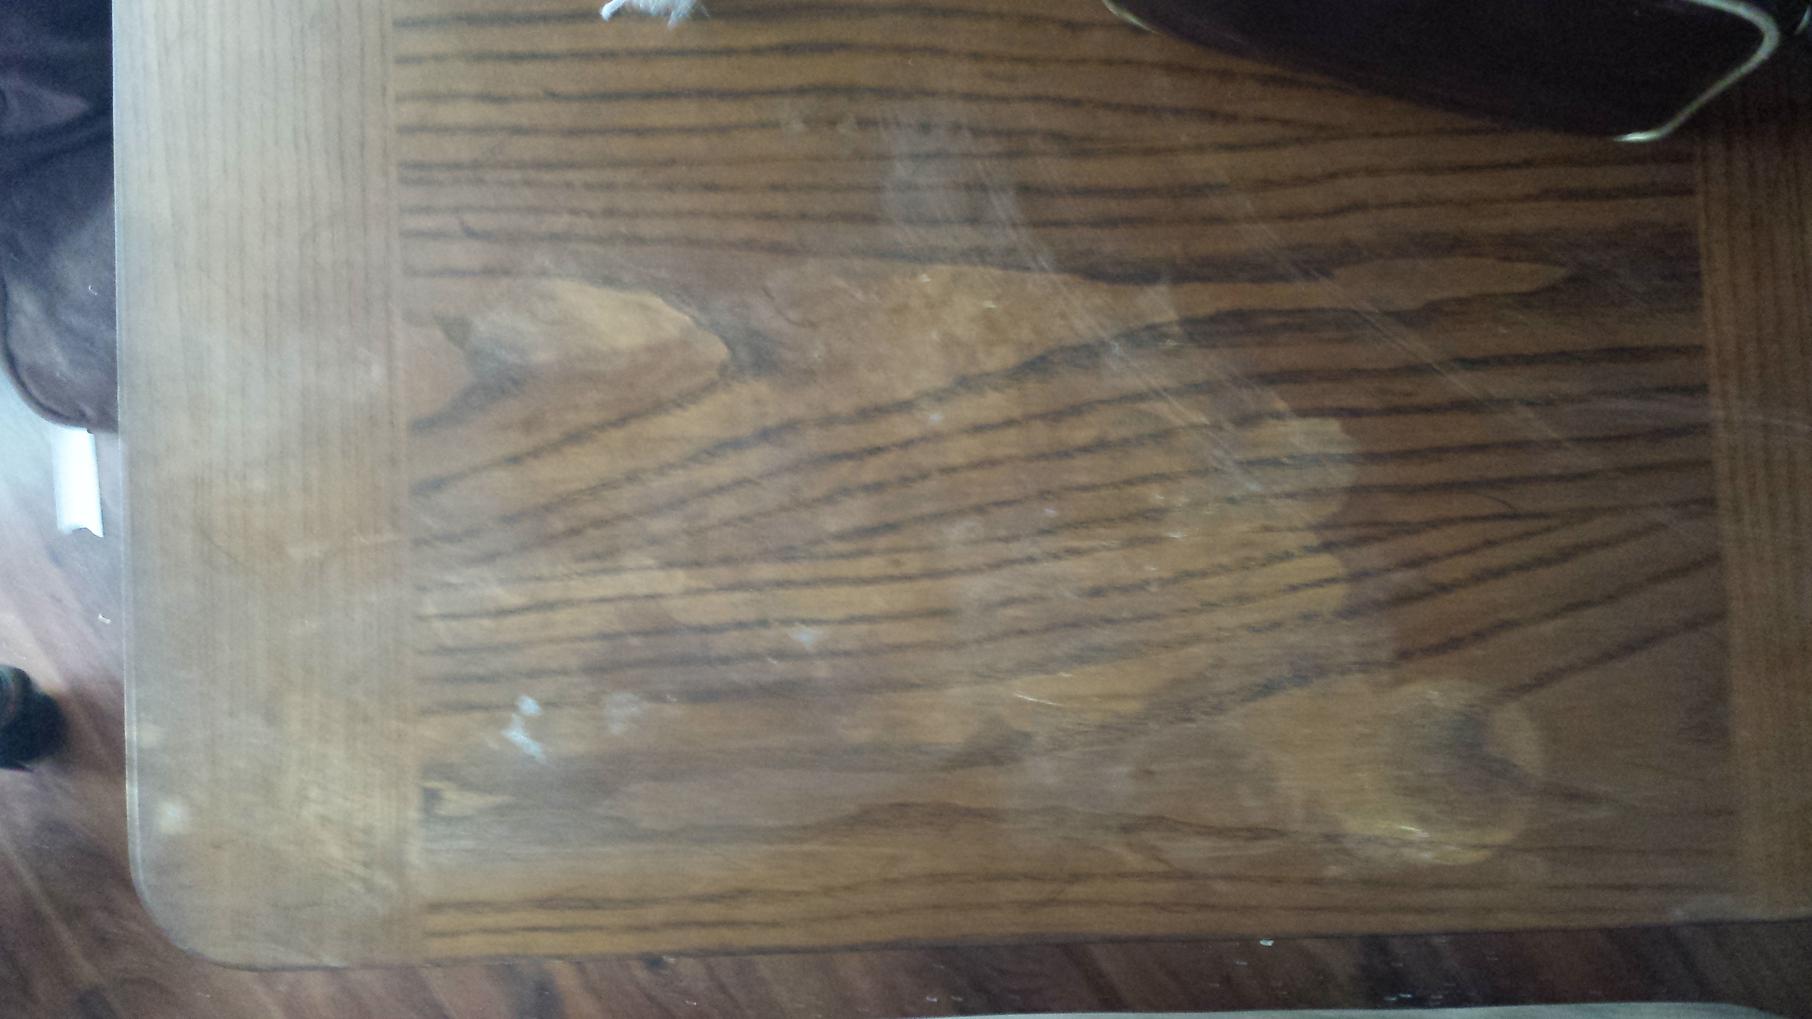 Nail Polish Remover Stain on Wood - Home Repair Forum